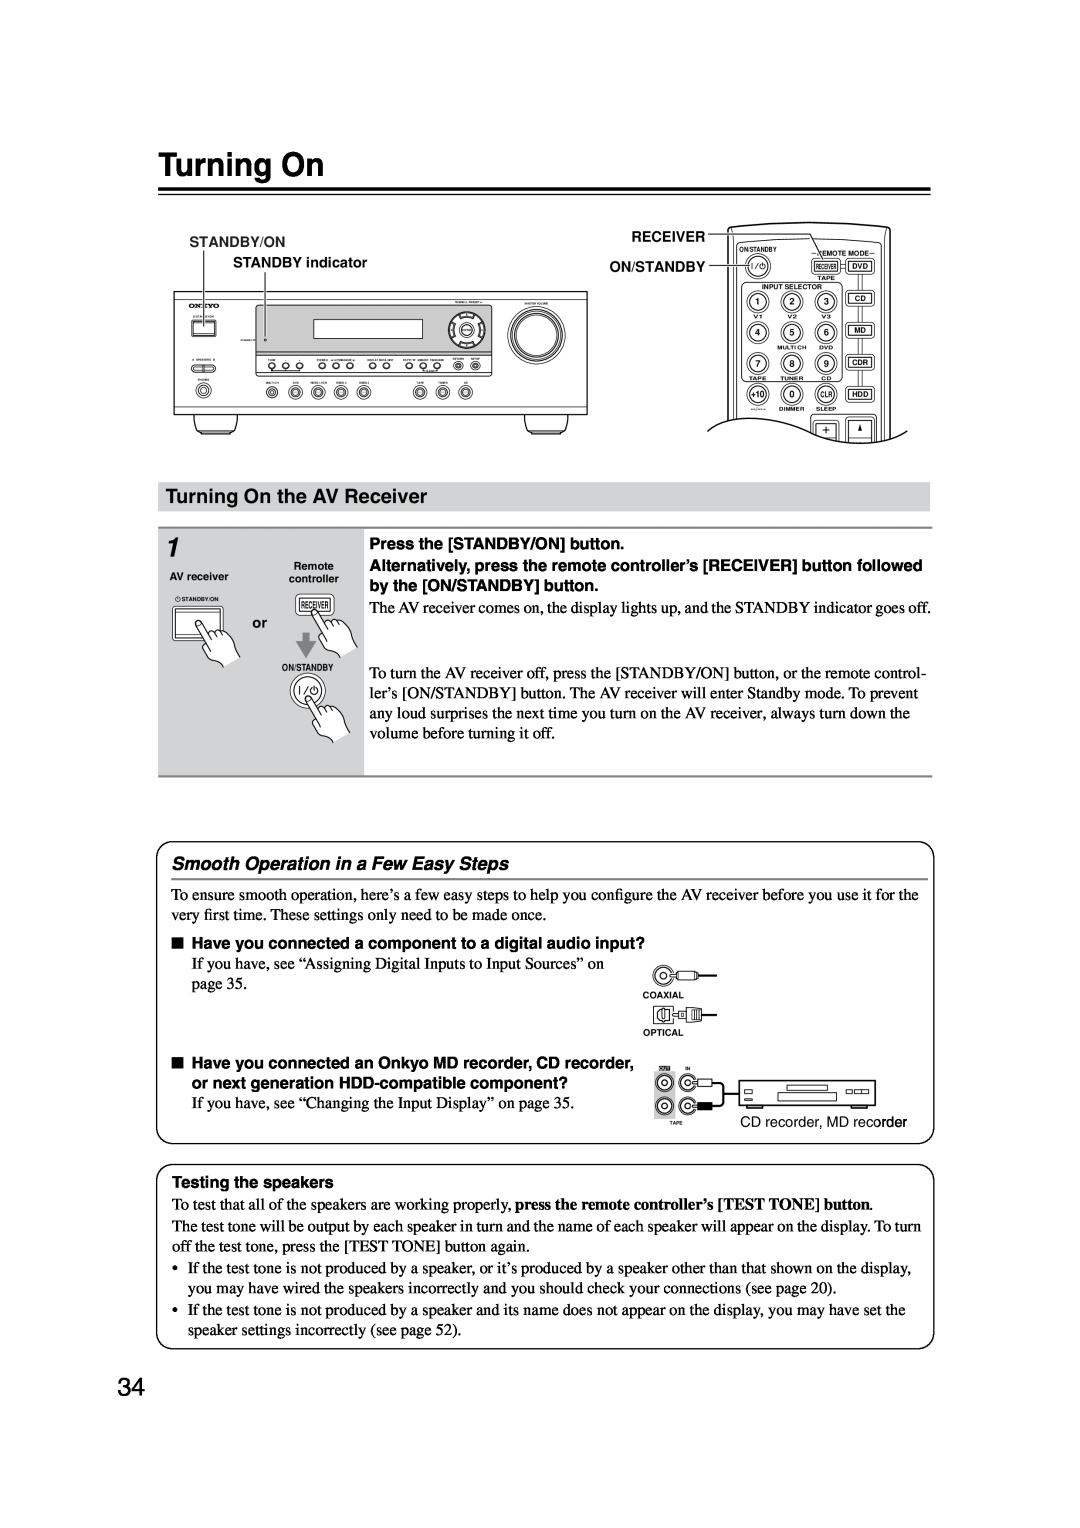 Onkyo HT-S590 instruction manual Turning On the AV Receiver, Smooth Operation in a Few Easy Steps 